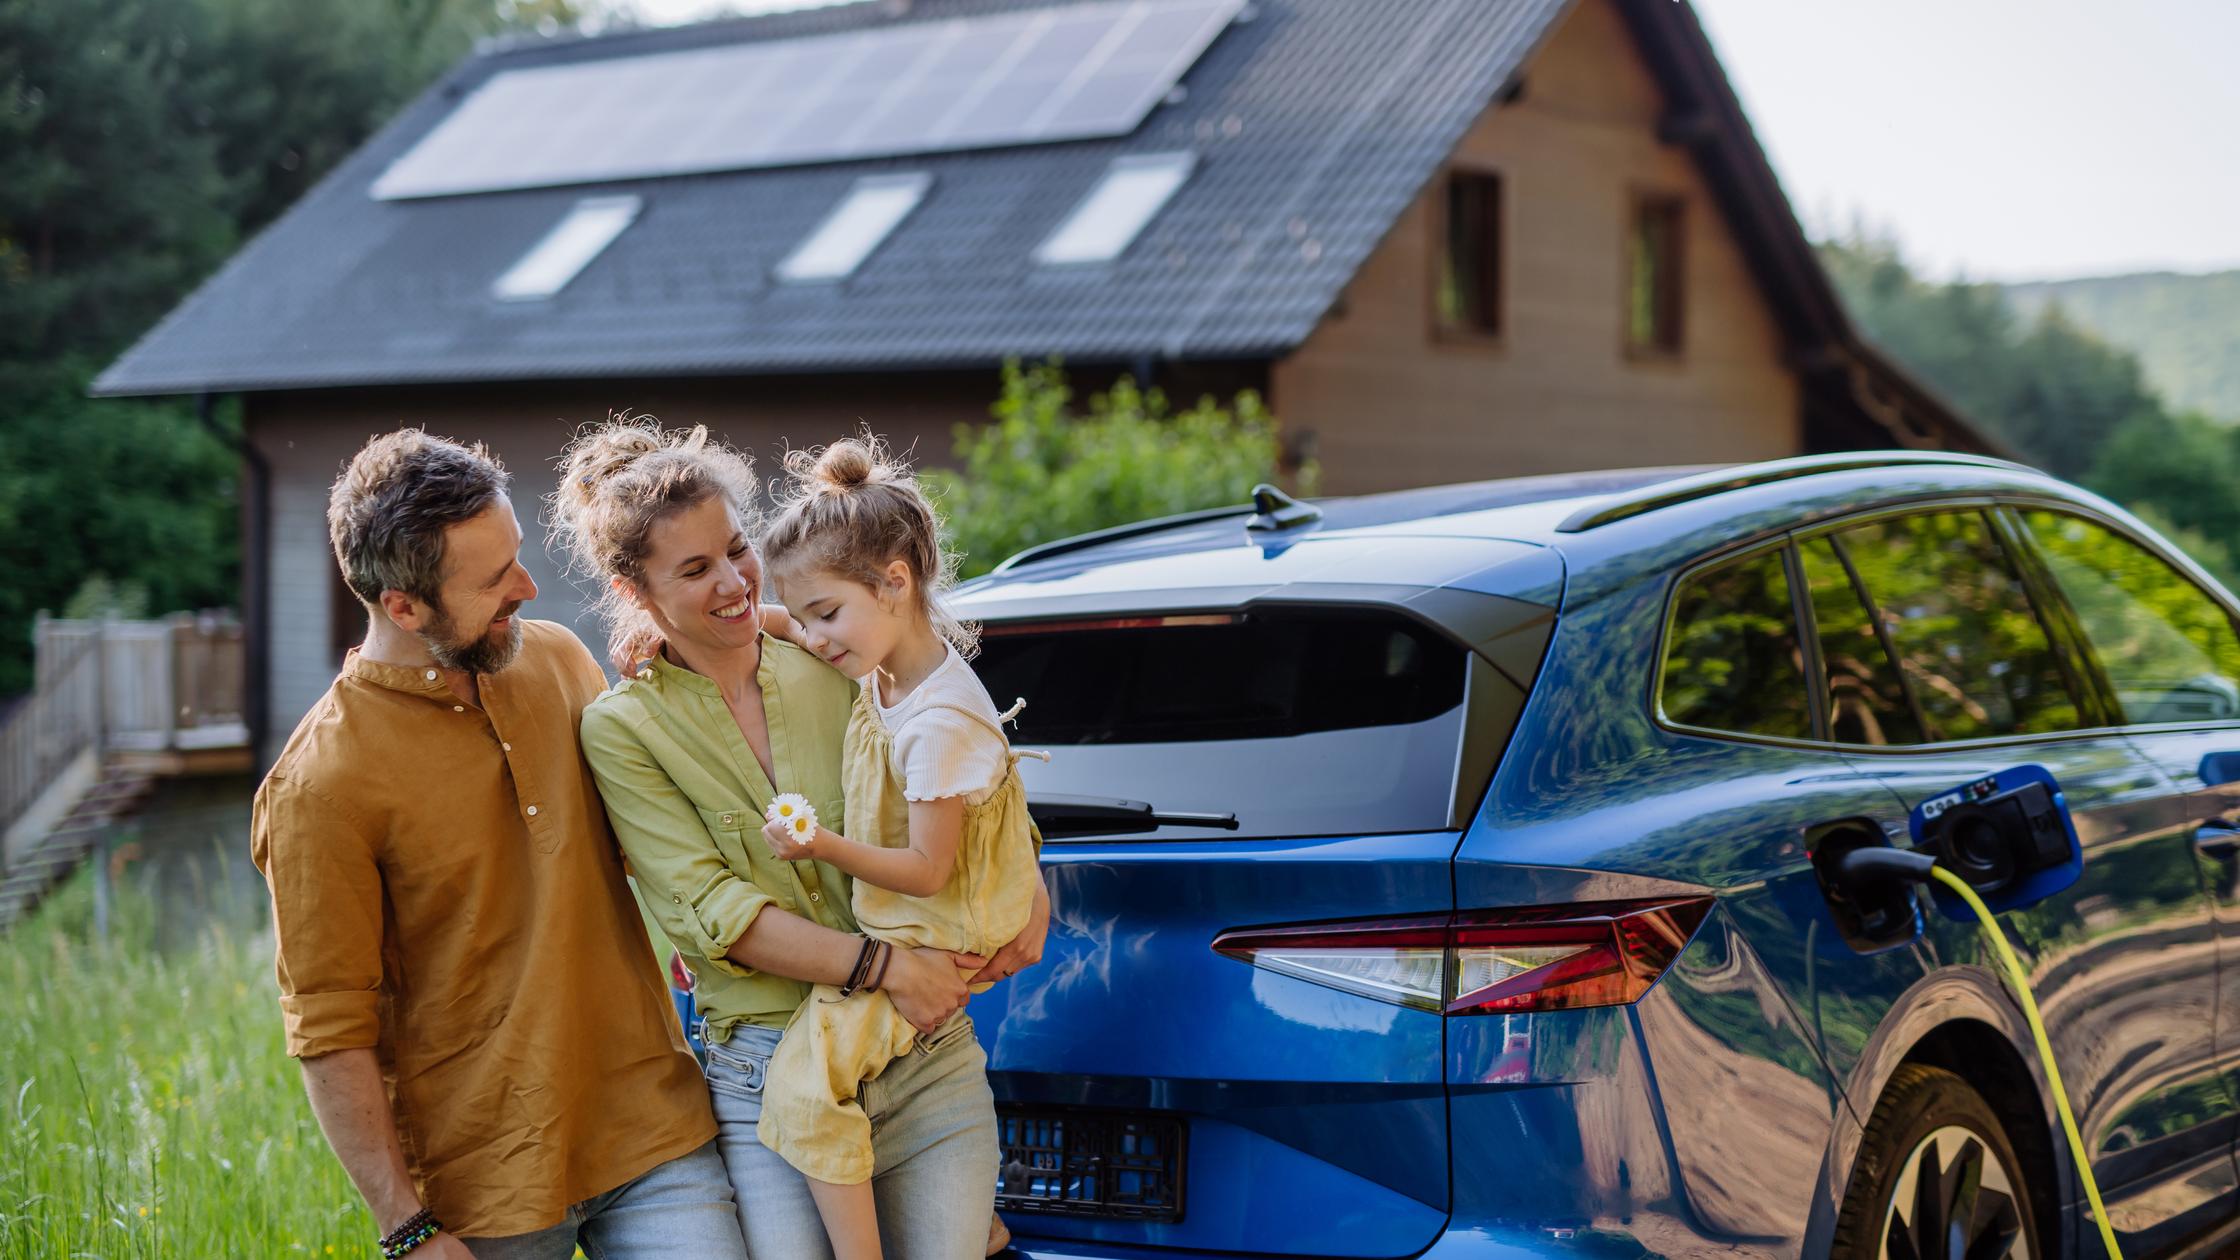 Family outside solar powered house with electric car